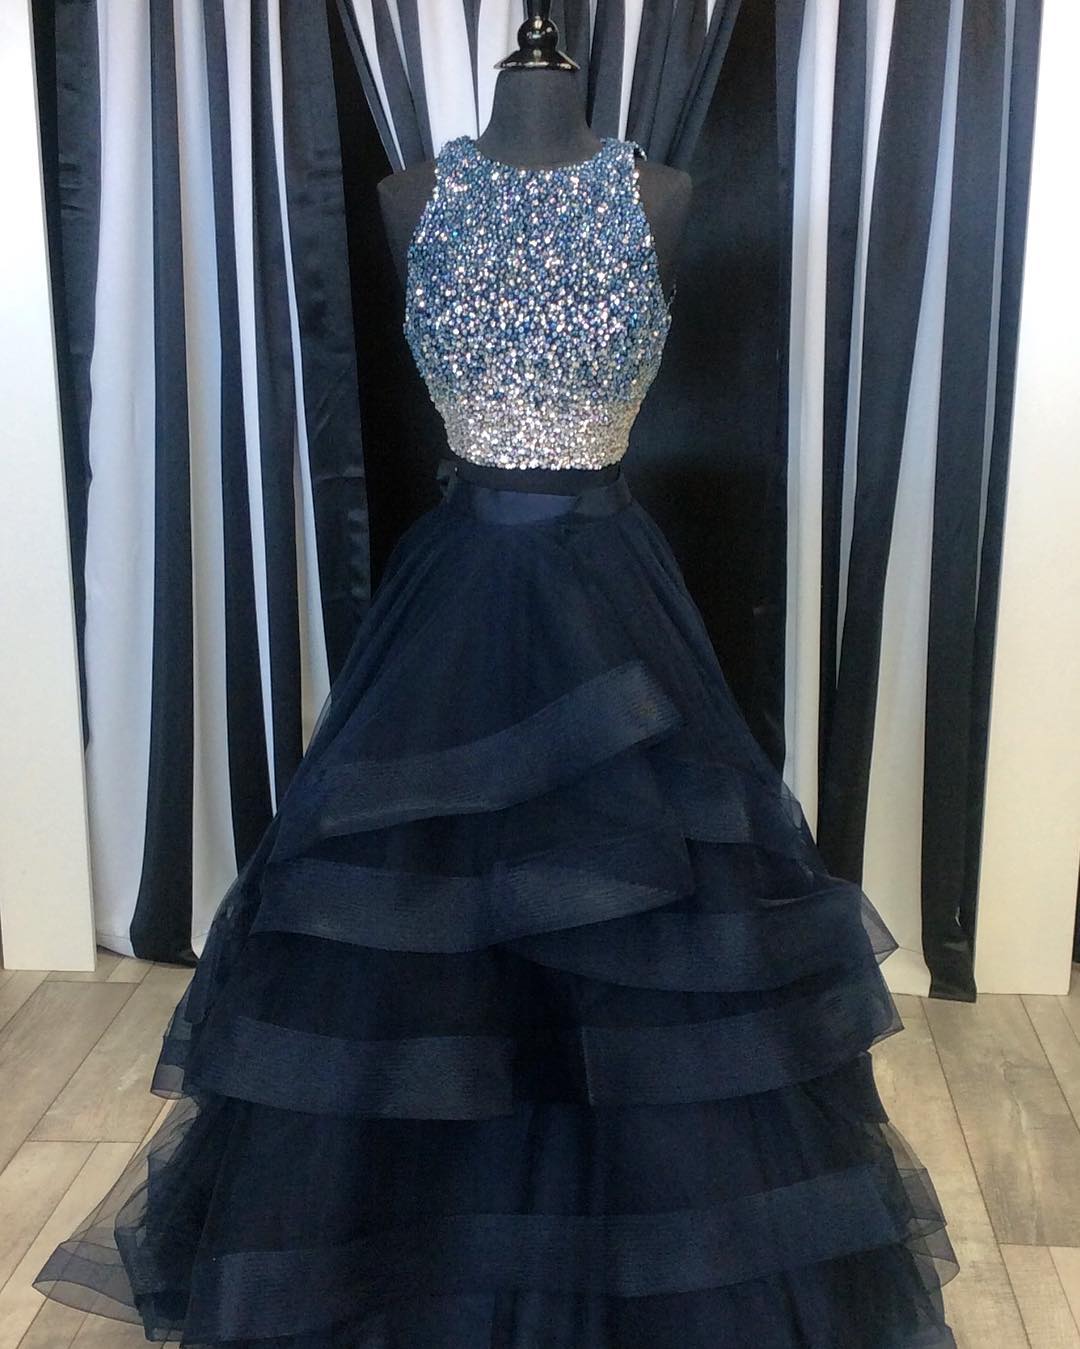 Evening Dresses, Prom Dresses,party Dresses,two Piece Prom Dresses,ruffles Ball Gowns,sparkly Sequins Dress,2 Piece Prom Dress,long Party